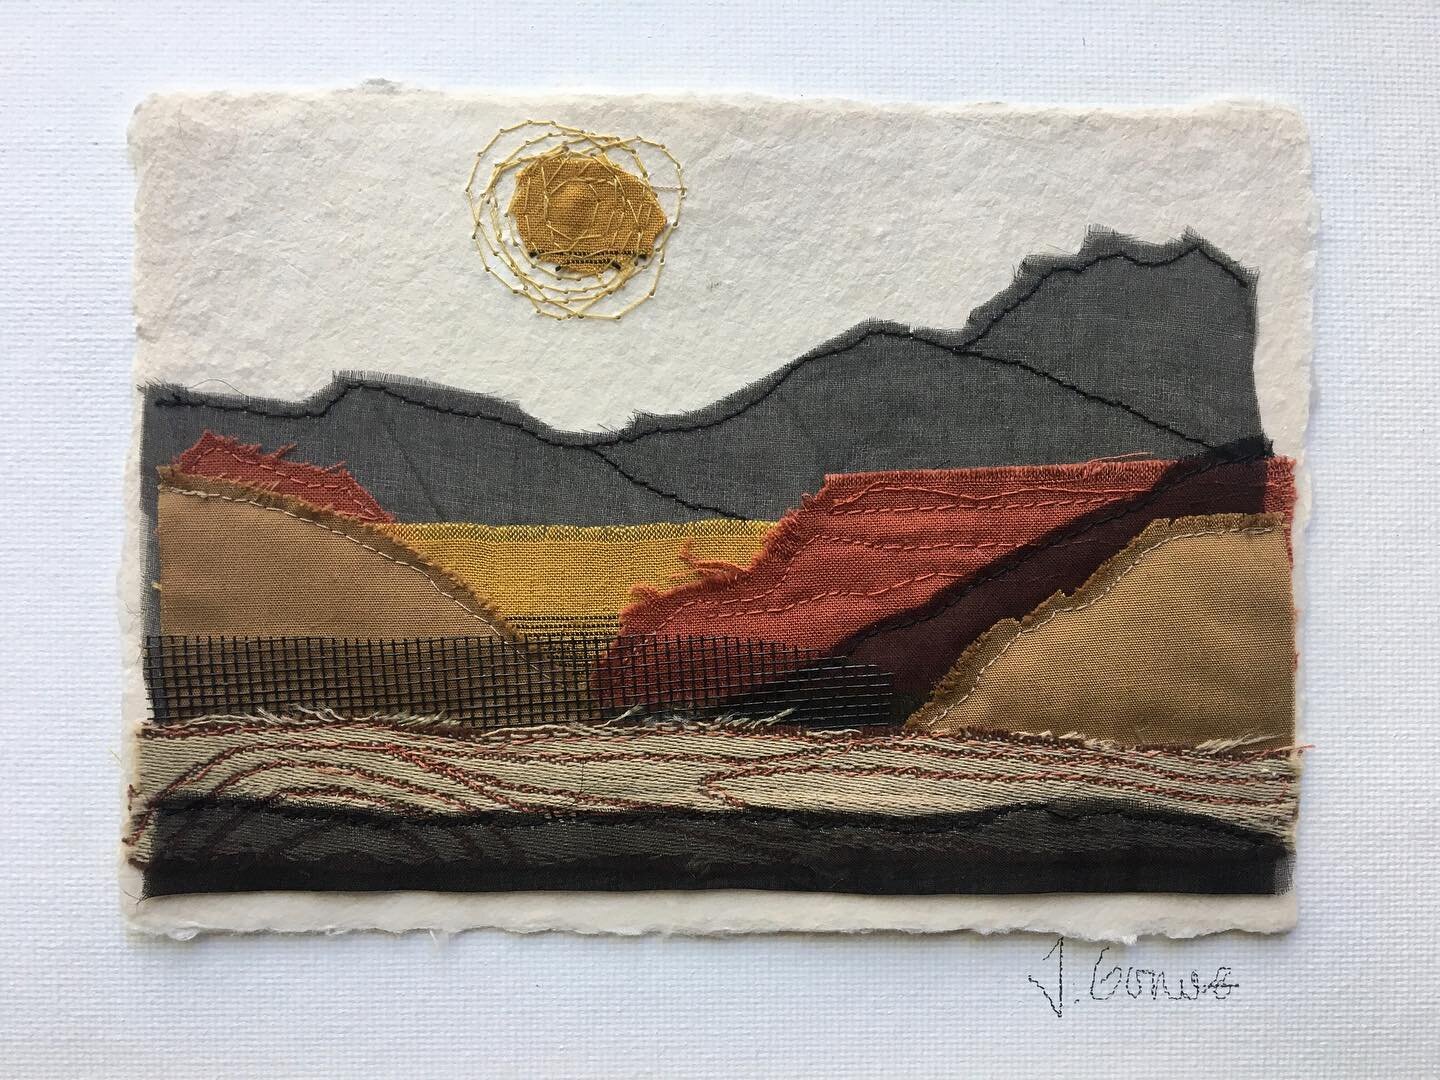 Inspired by the rich textures of frayed fabric edges and deckled-edge handmade papers, I took these materials and composed them into mini adventure collages. Which one would you like to visit in real life?
.
This little series of work is a short depa